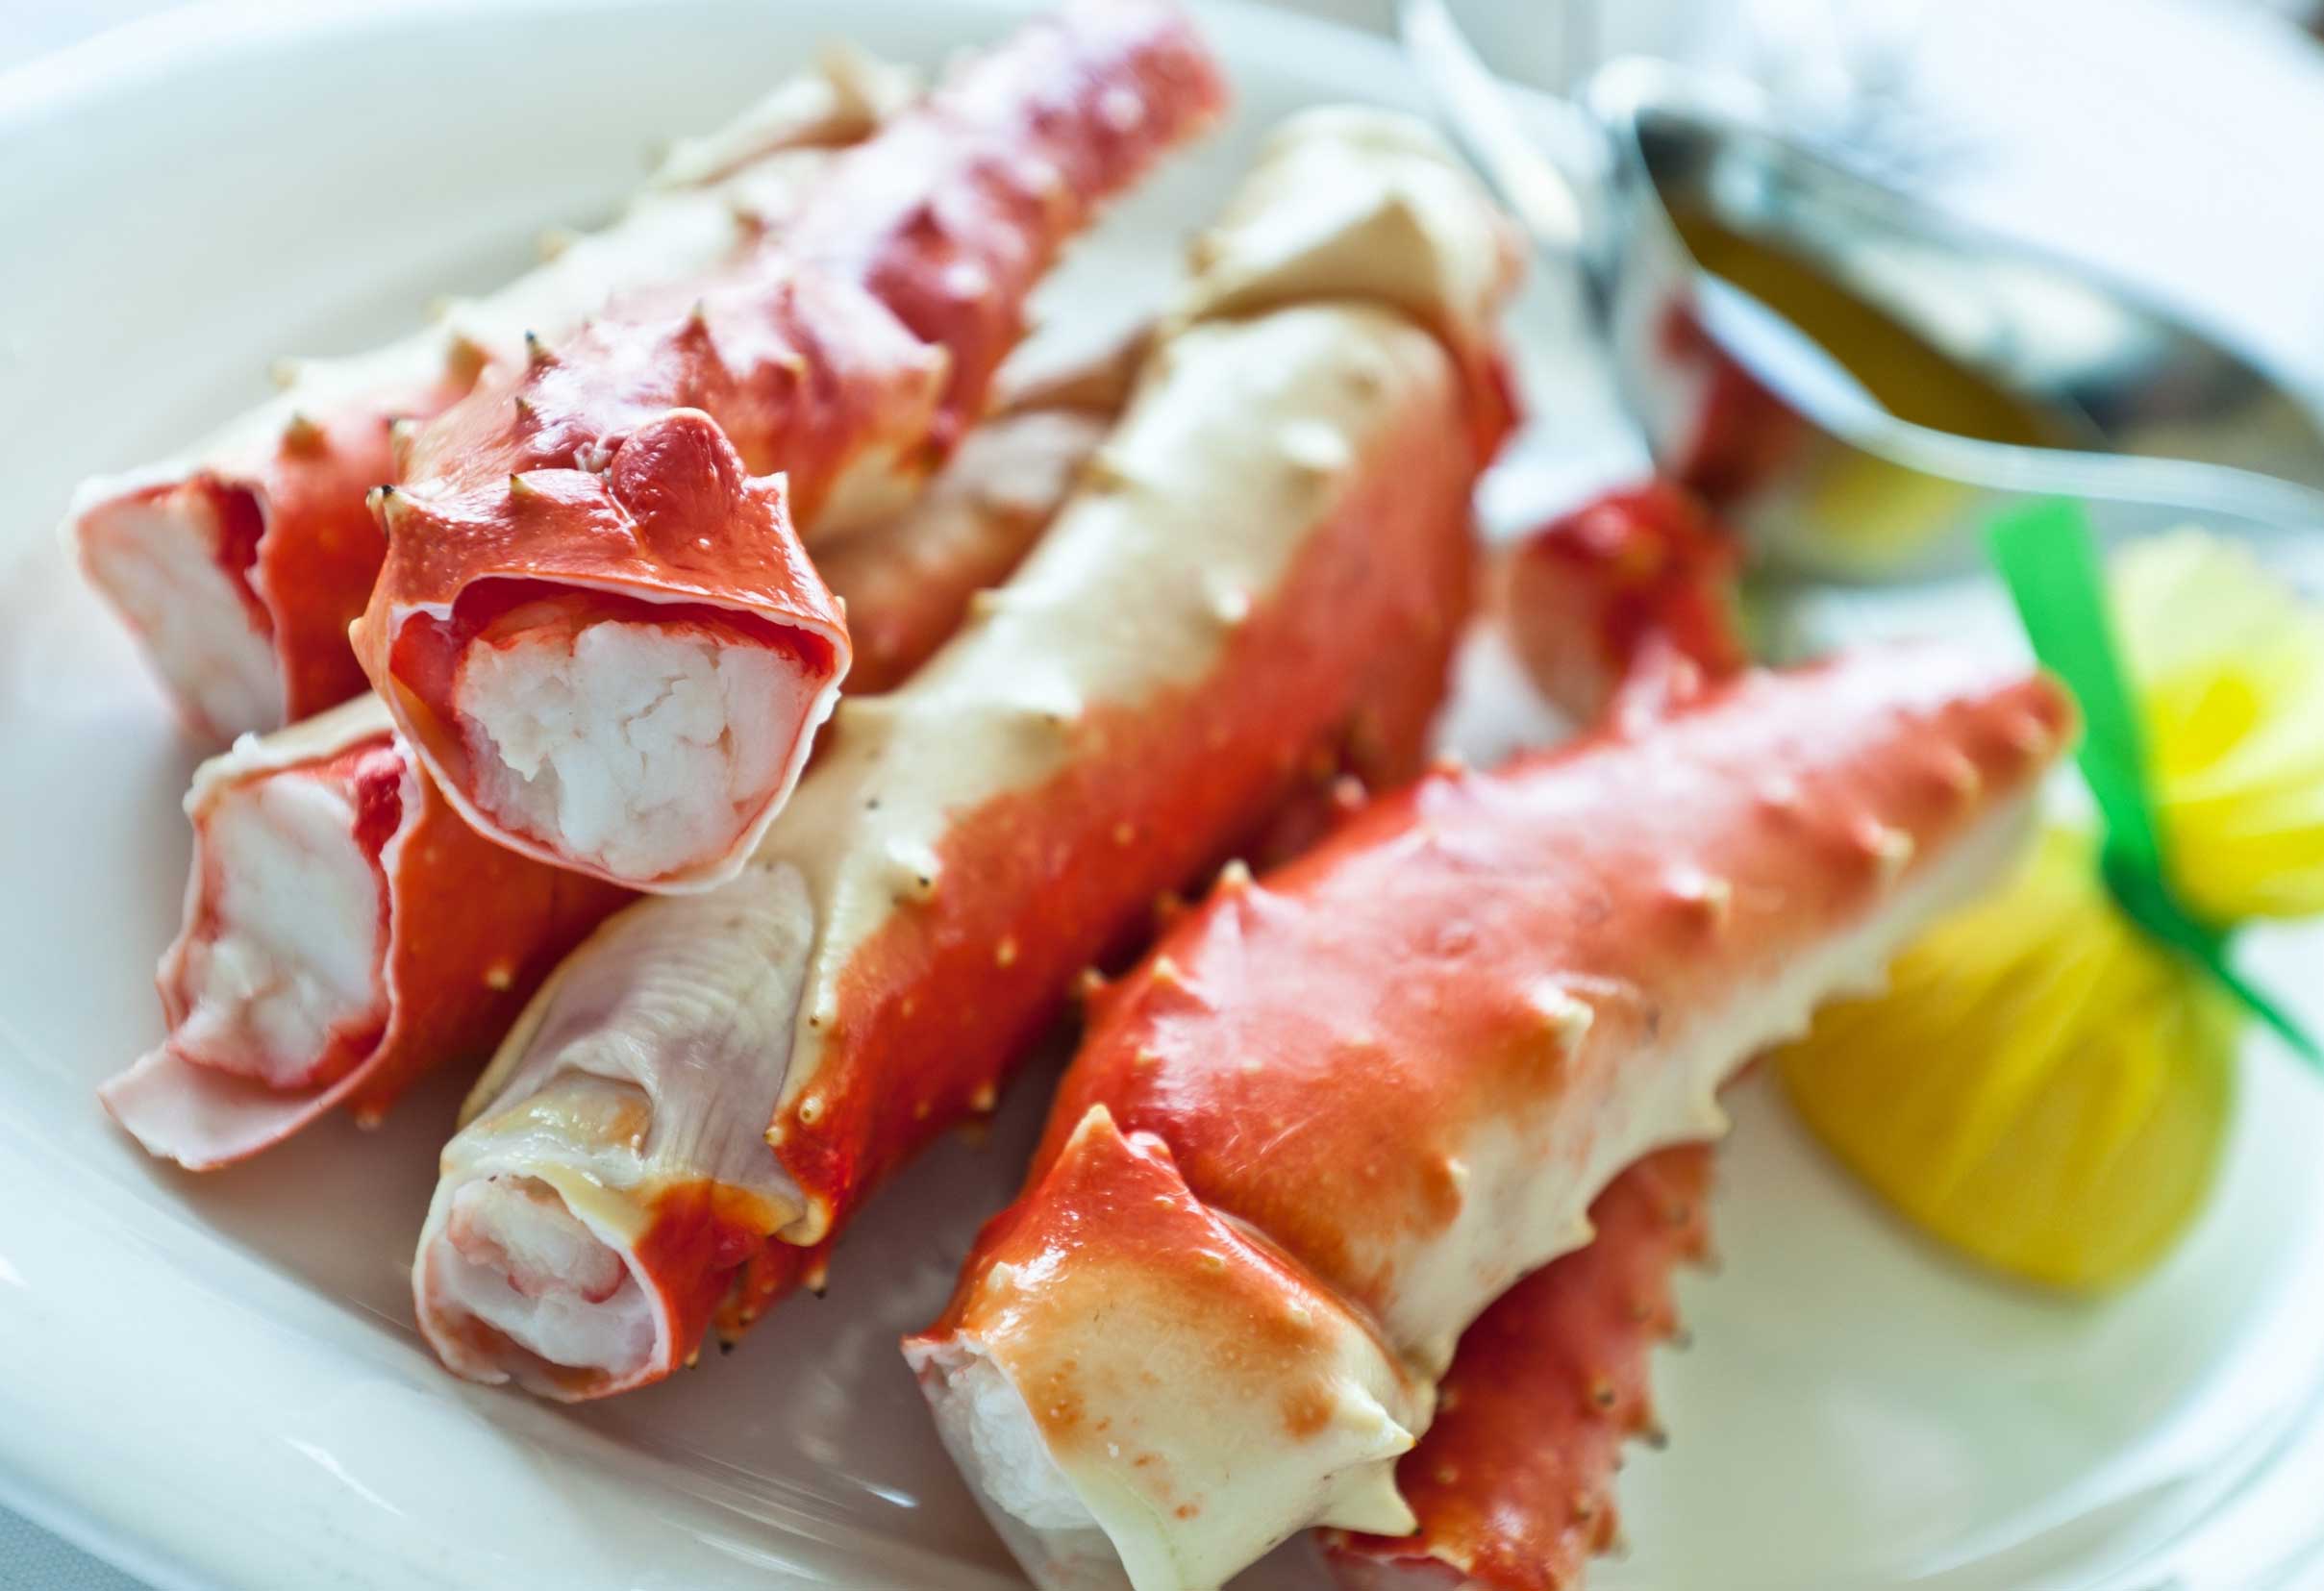 Crab Dishes Wallpaper High Quality